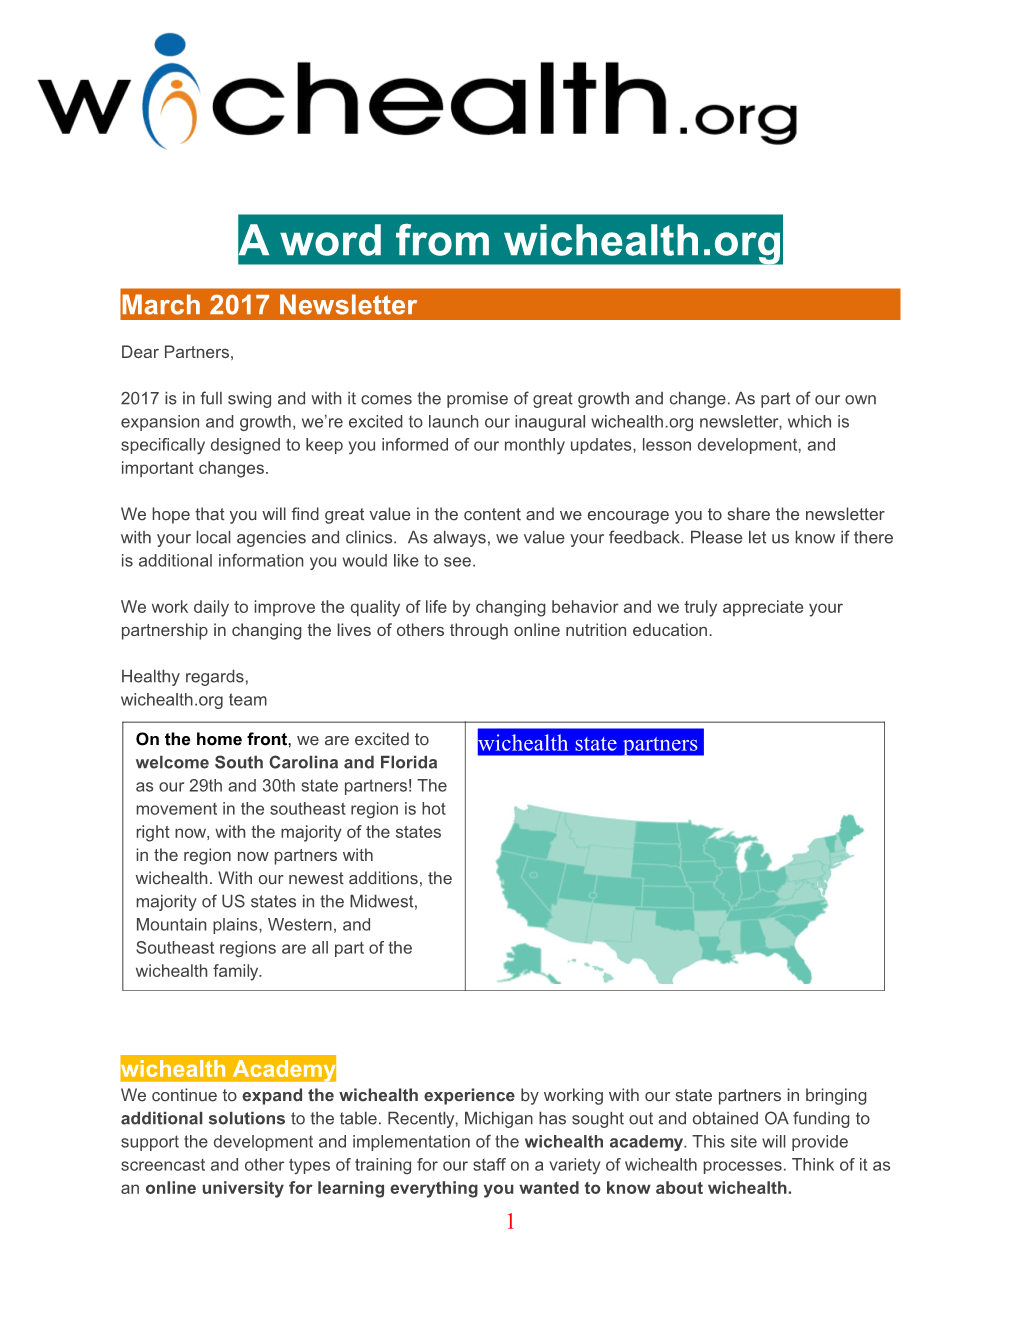 A Word from Wichealth.Org